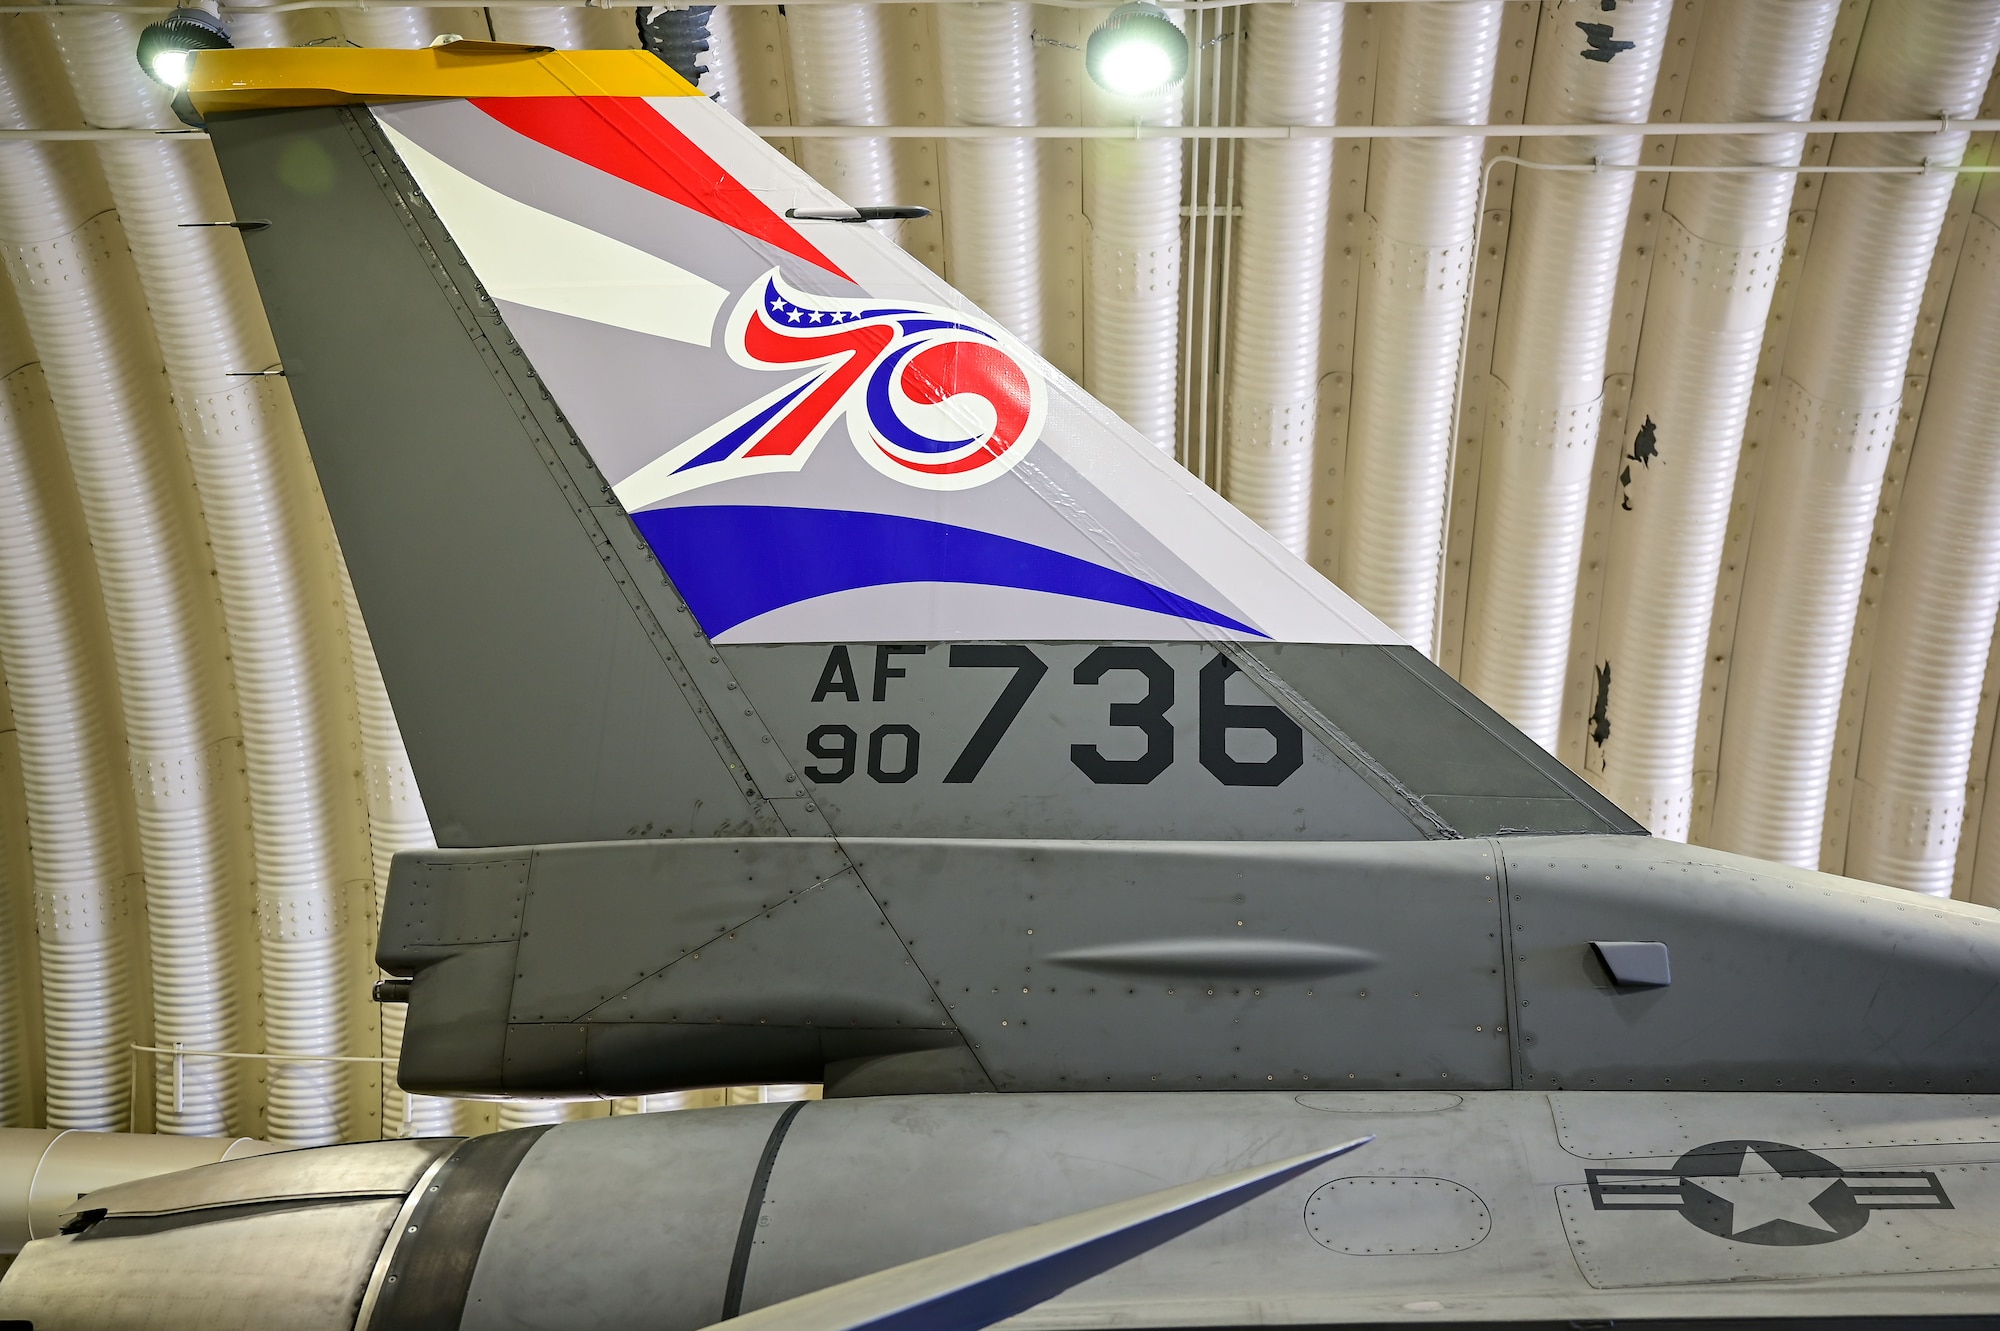 An F-16 Fighting Falcon assigned to the 80th Fighter Squadron sits with an applied 70th anniversary heritage tail flash decal at Osan Air Base, Republic of Korea, May 1, 2023. The decal, symbolizing the 70th anniversary of the US-ROK Alliance, will be showcased on both nations’ aircraft and can be seen on the aircraft during aerial events for the duration of 2023. (U.S. Air Force photo by Tech. Sgt. Timothy Dischinat)